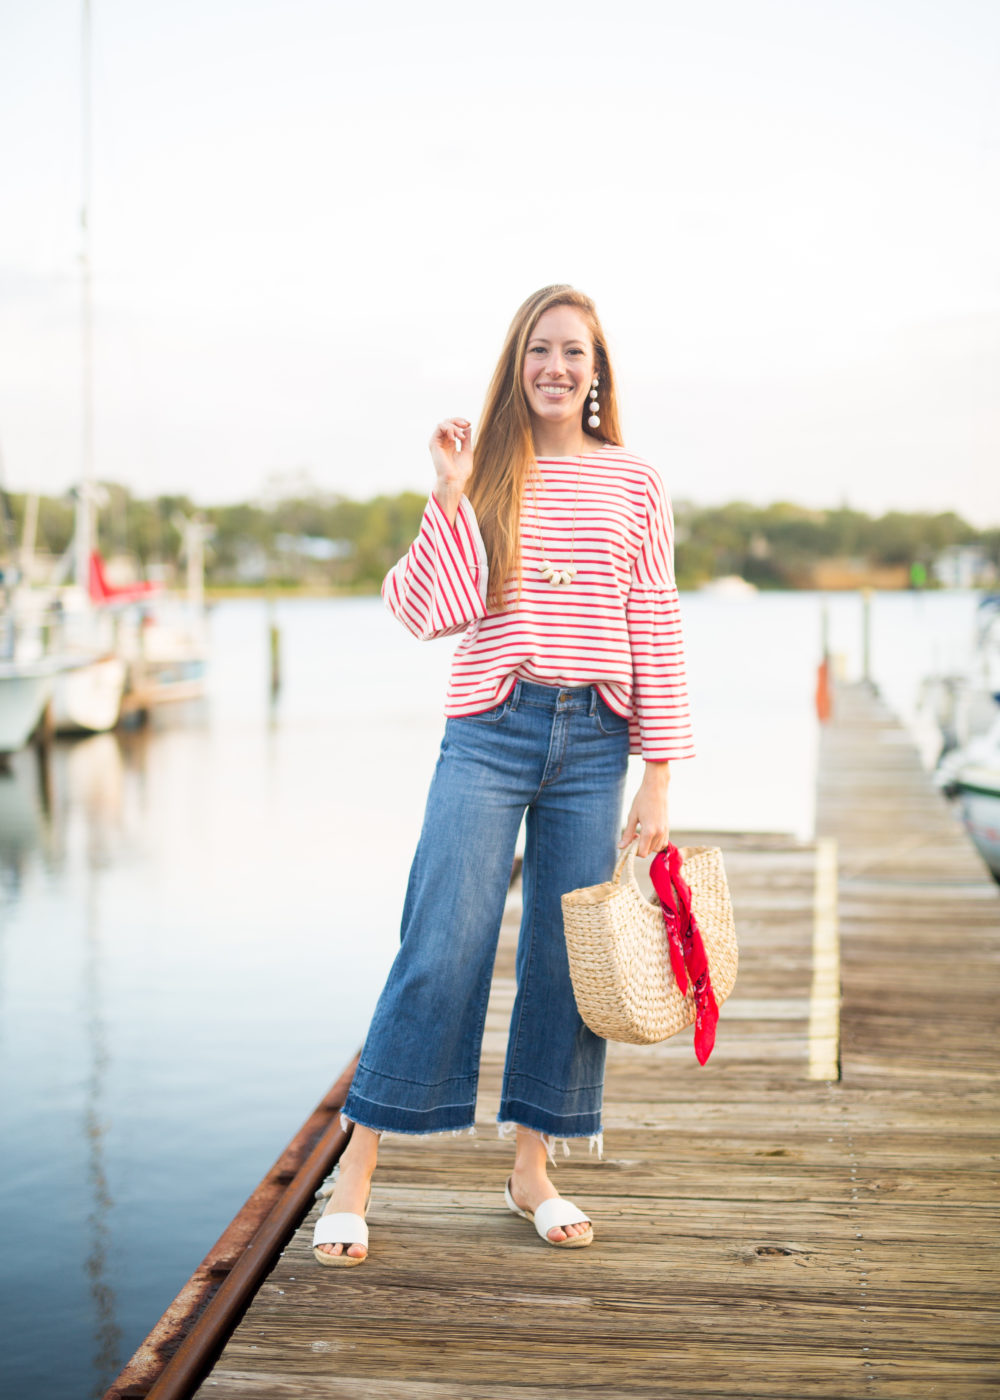 A Classic Striped Look for Fall, Wearing Wide Leg Pants + Striped Top | Sunshine Style